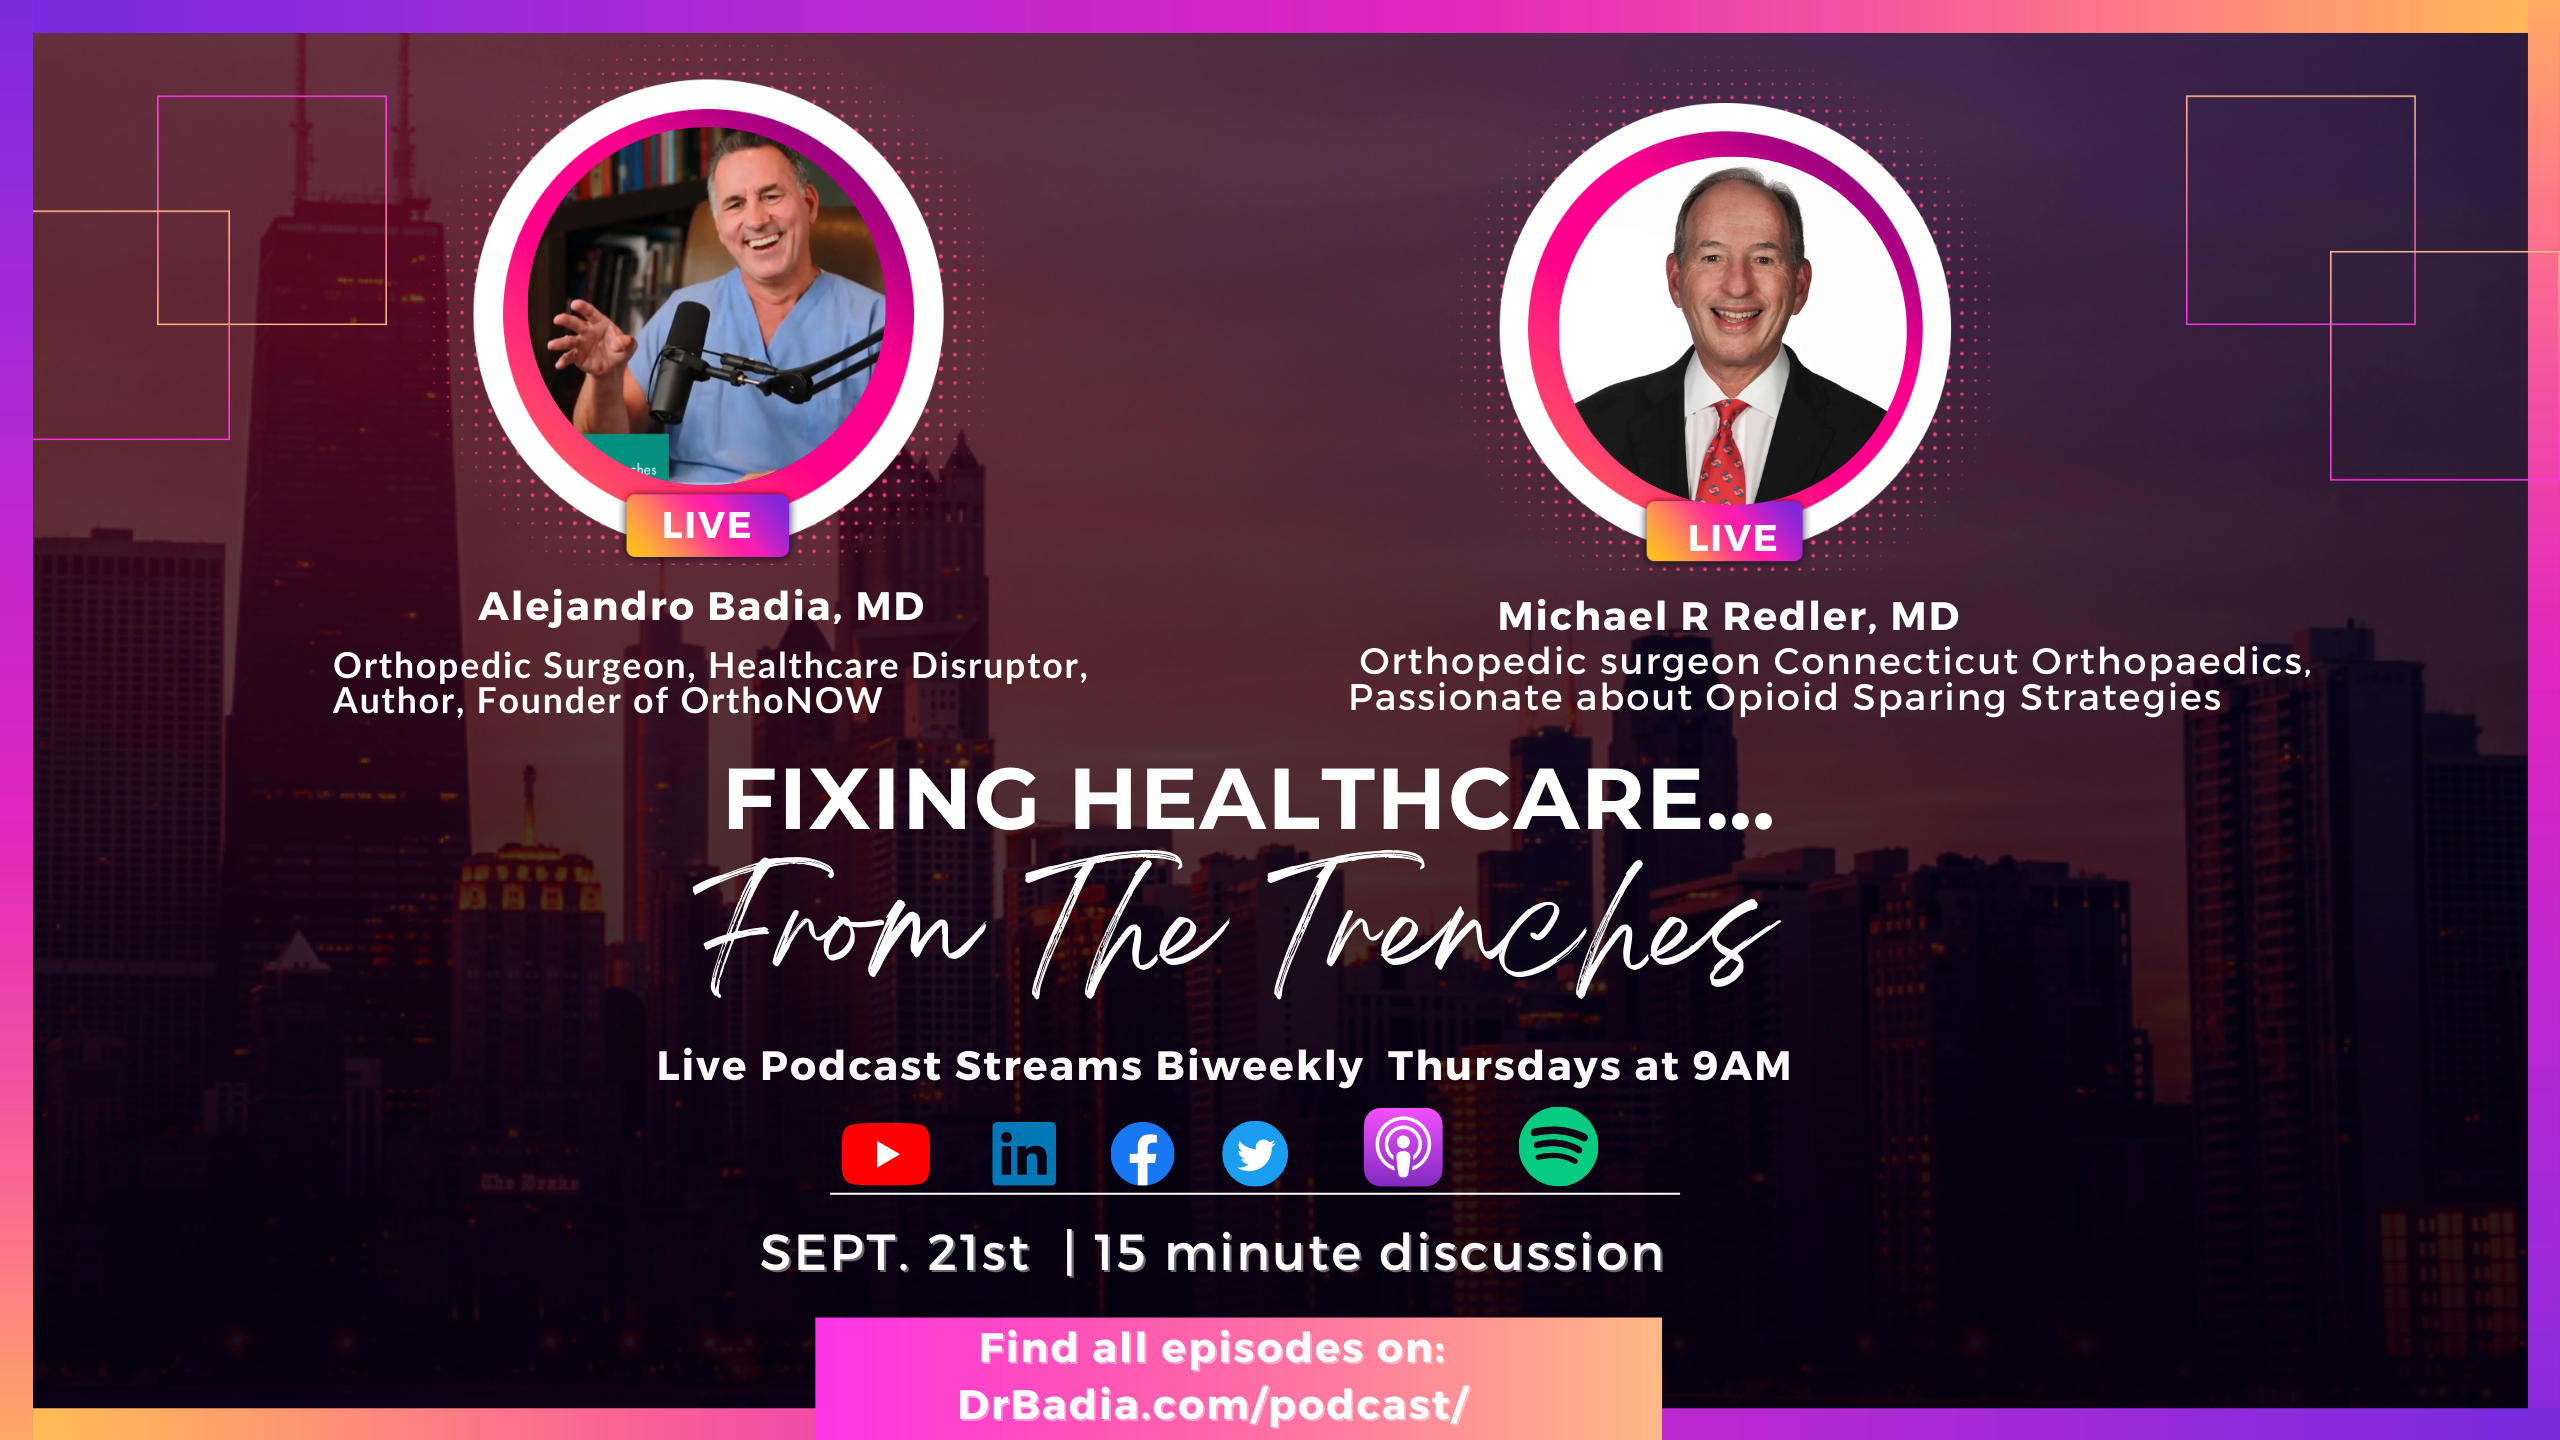 Episode 20 Fixing Healthcare...From the trenches